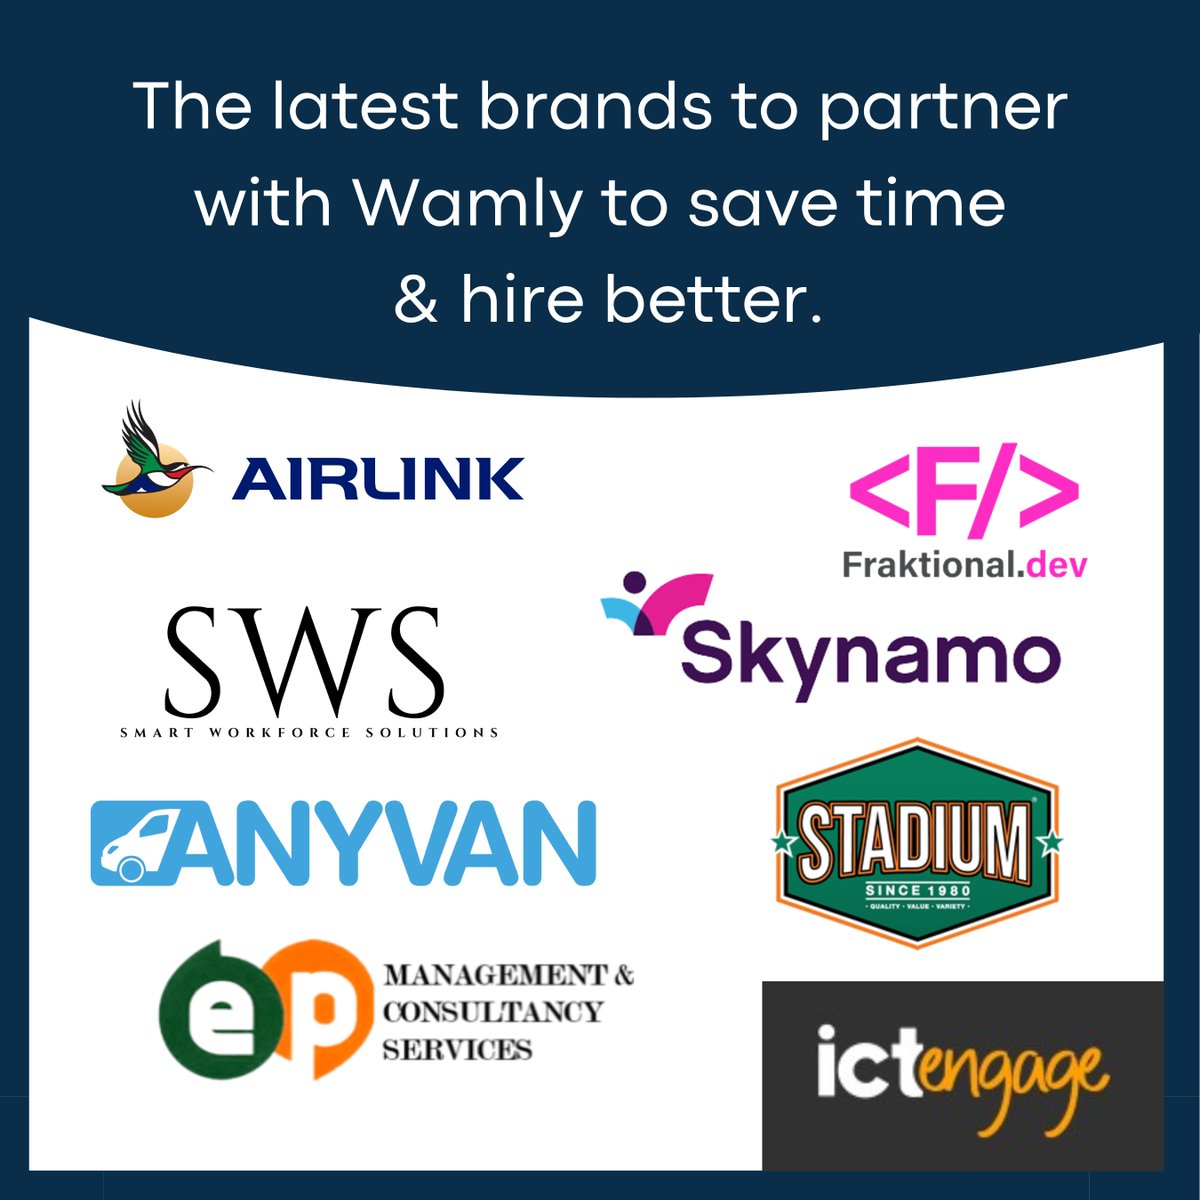 A big shoutout to these new brands who have joined Wamly! We're thrilled to welcome them on board 🎉🔥. If you would like to change the way to hire visit our website at wamly.io #newpartners #buildingtogether #innovation #talentdiscovery